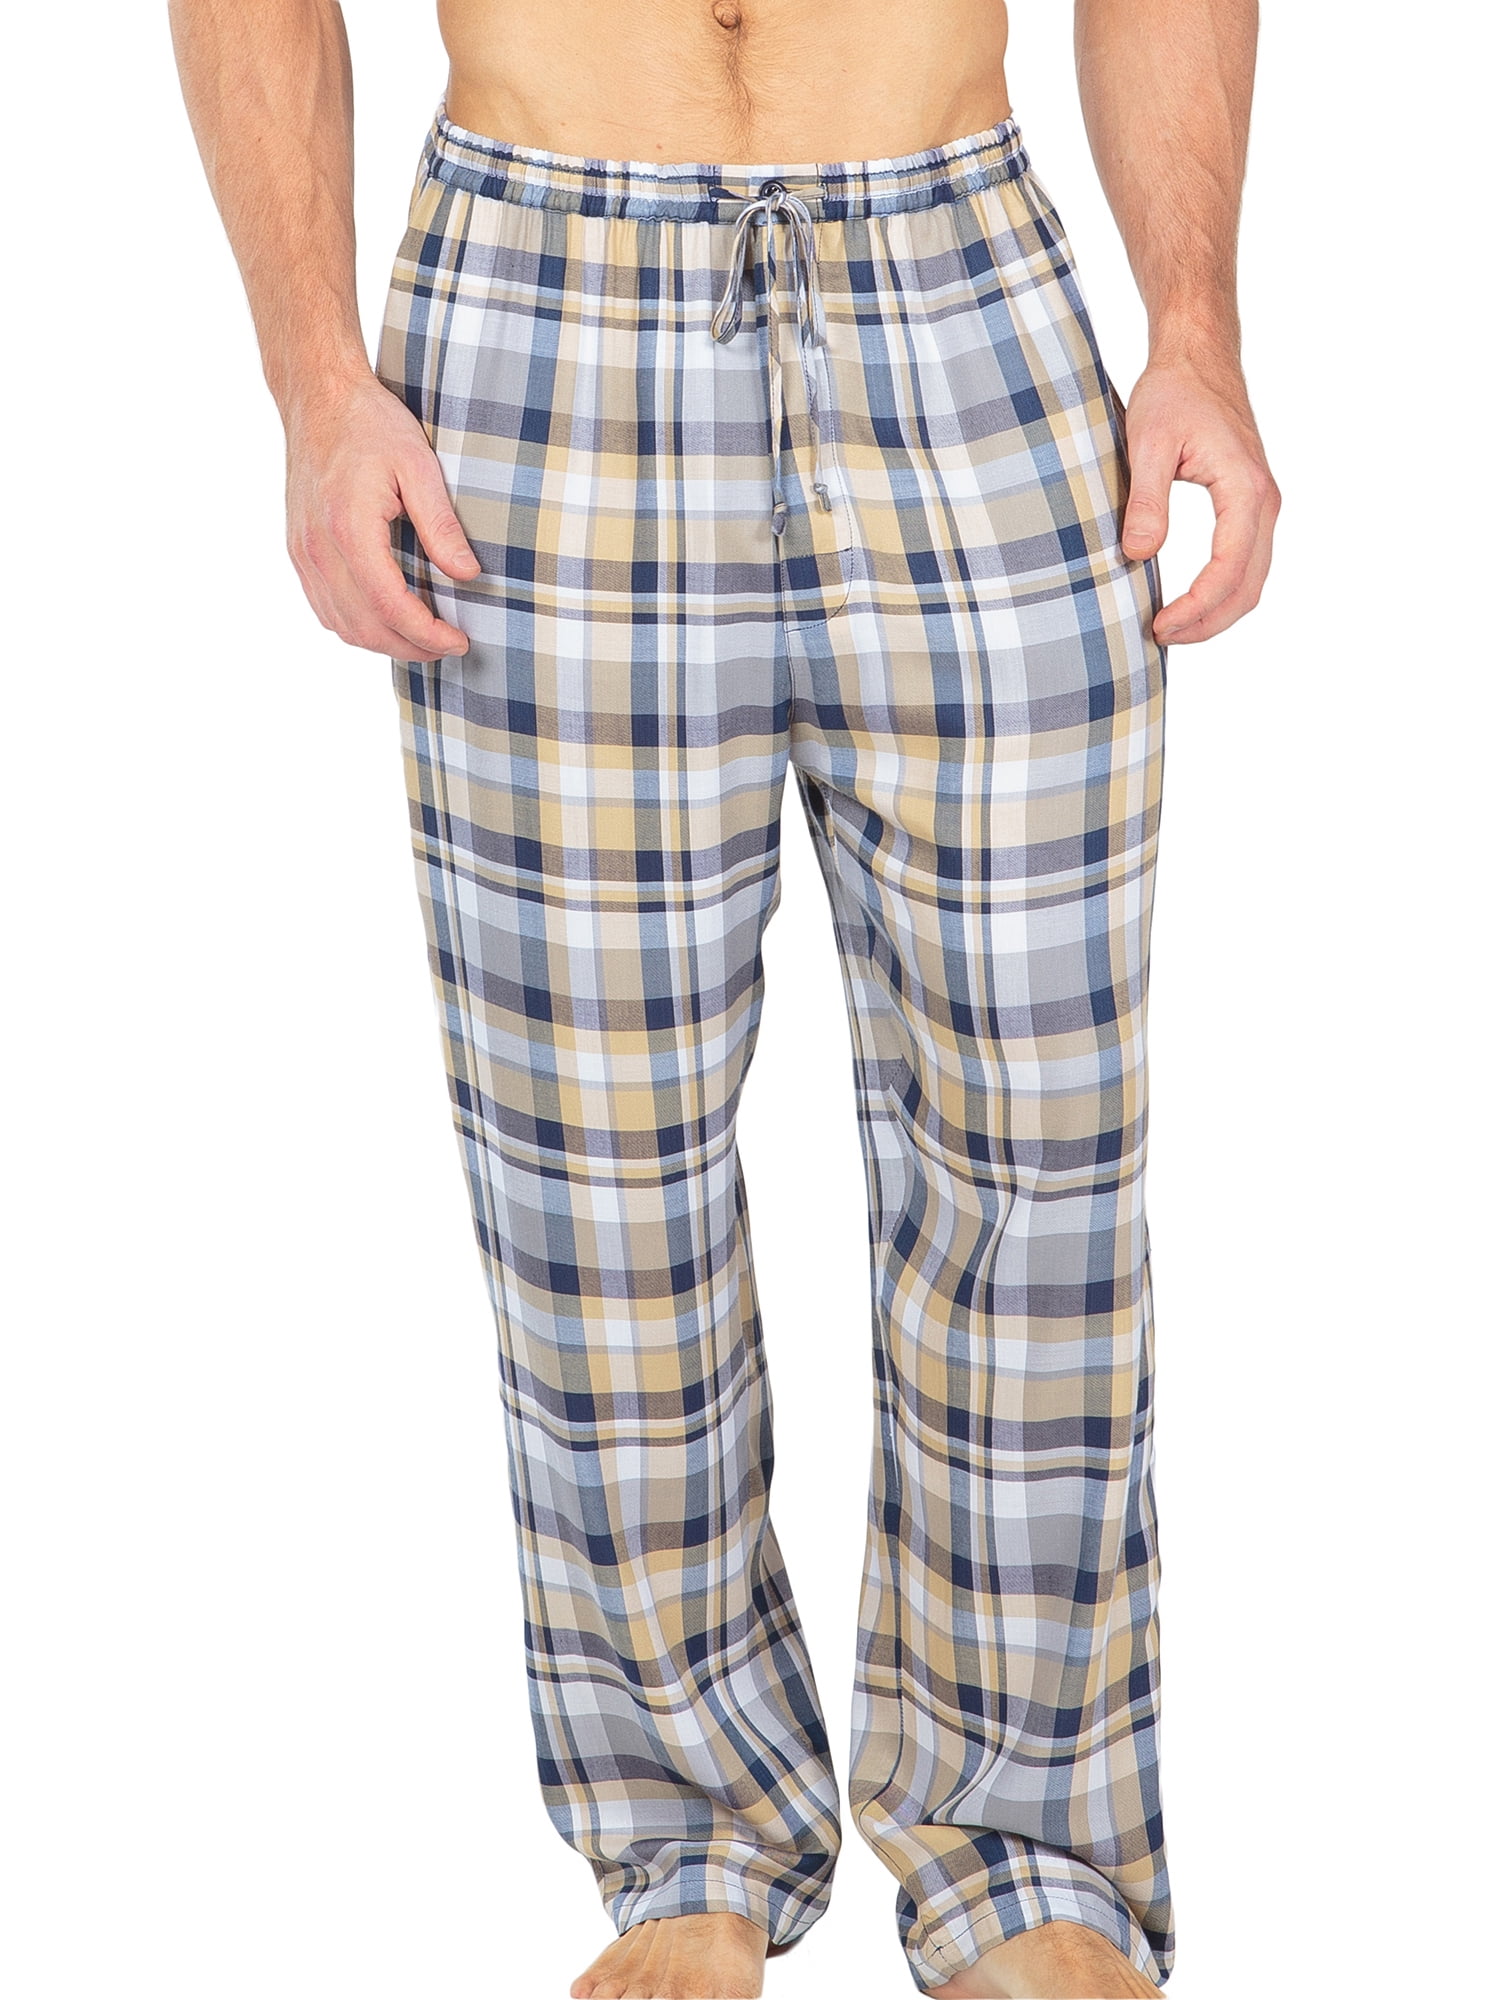 Men’s Woven Plaid PJ Pants - Pajamas in Bamboo Viscose by Texere ...